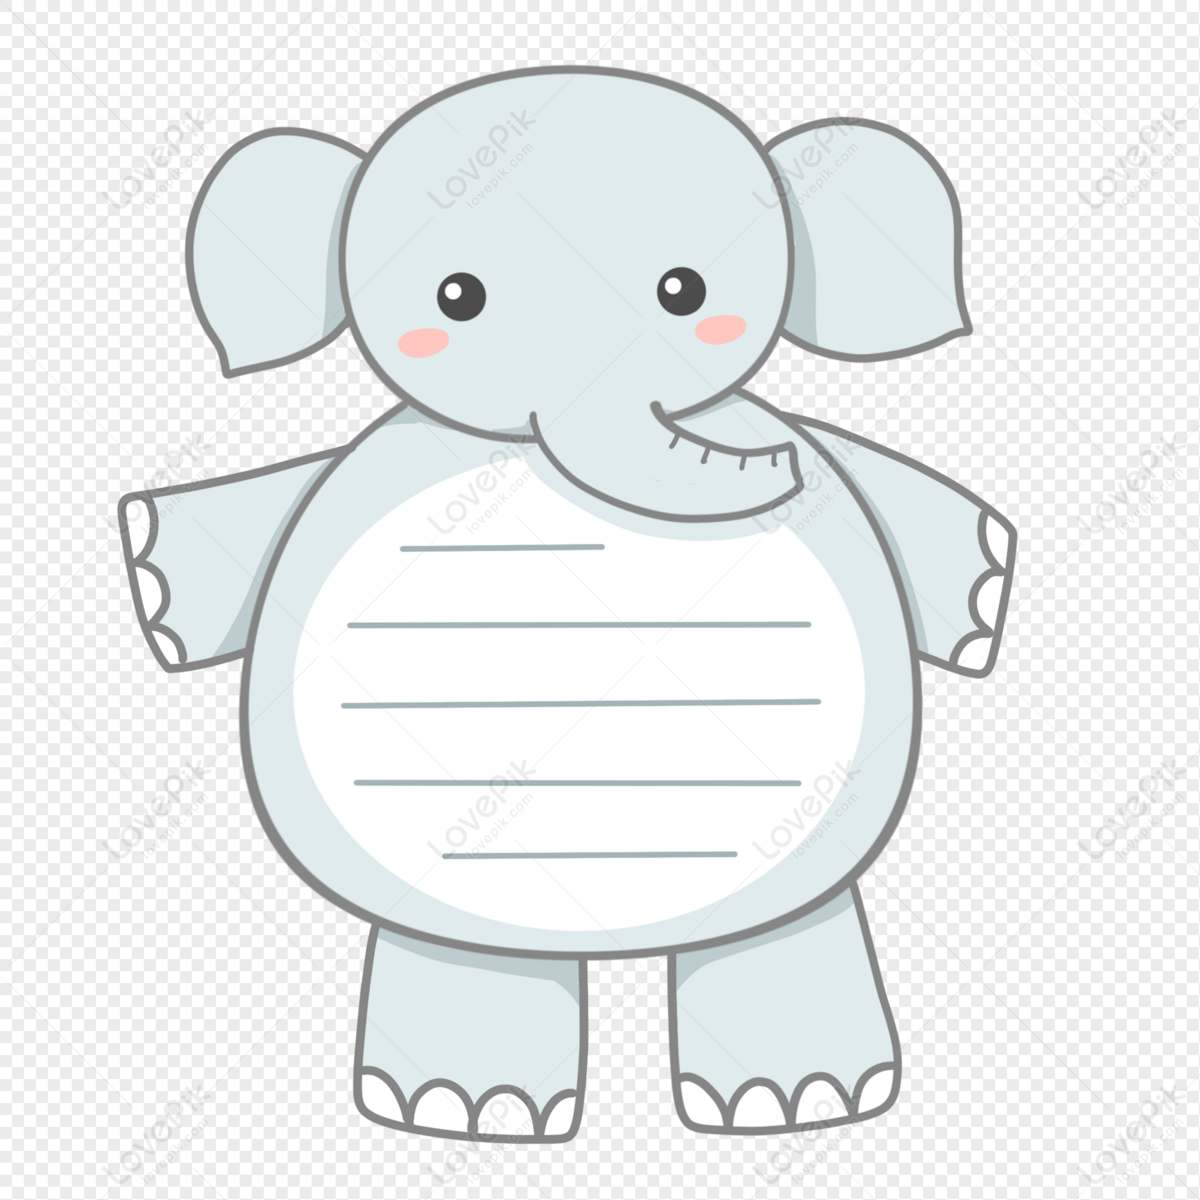 Cartoon Animal Elephant Border PNG Hd Transparent Image And Clipart Image  For Free Download - Lovepik | 401495074